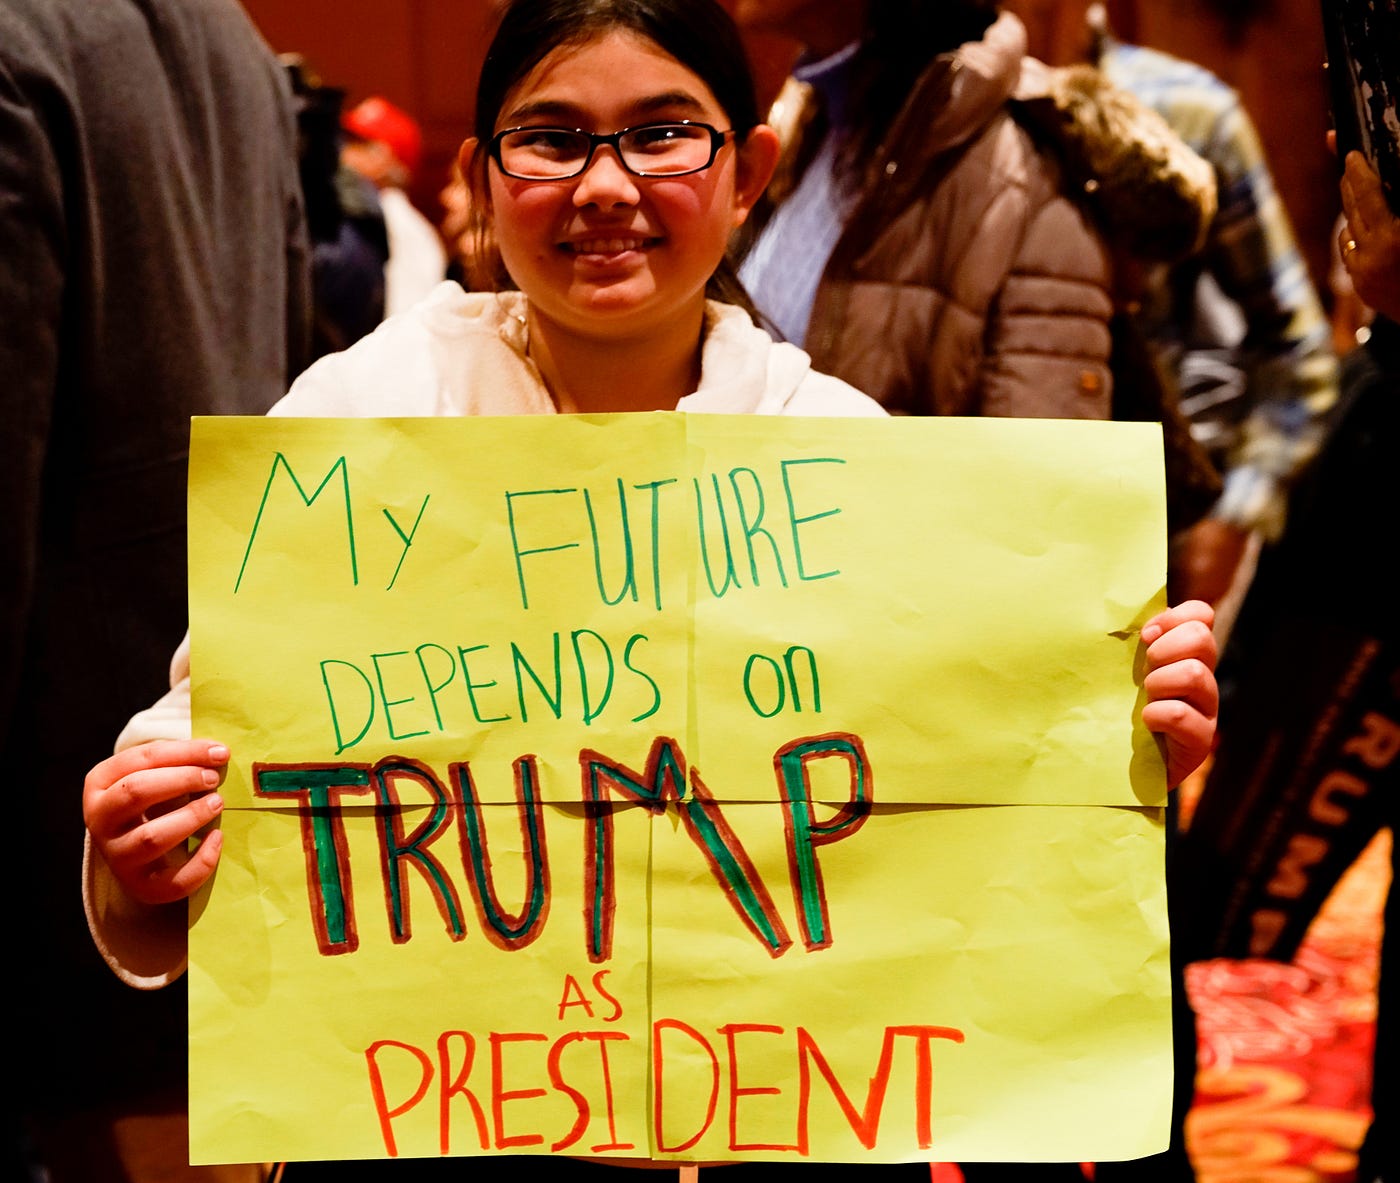 I Went To Donald Trumps Vegas Rally So You Wouldnt Have To By Jason Karsh Medium 